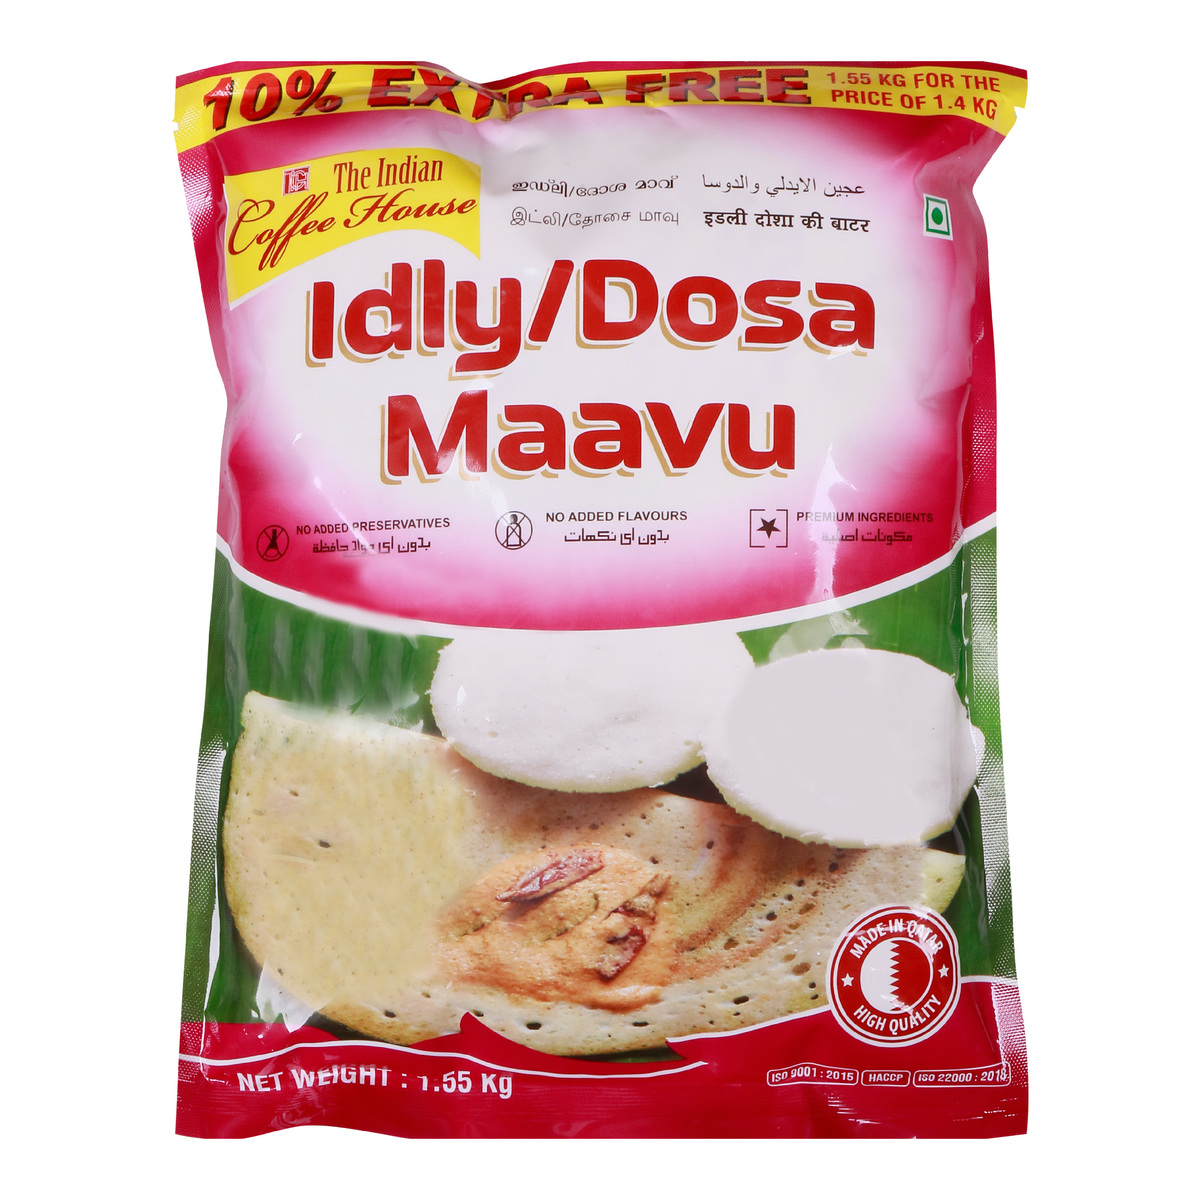 The Indian Coffee Idly/Dosa Maavu 1.55kg